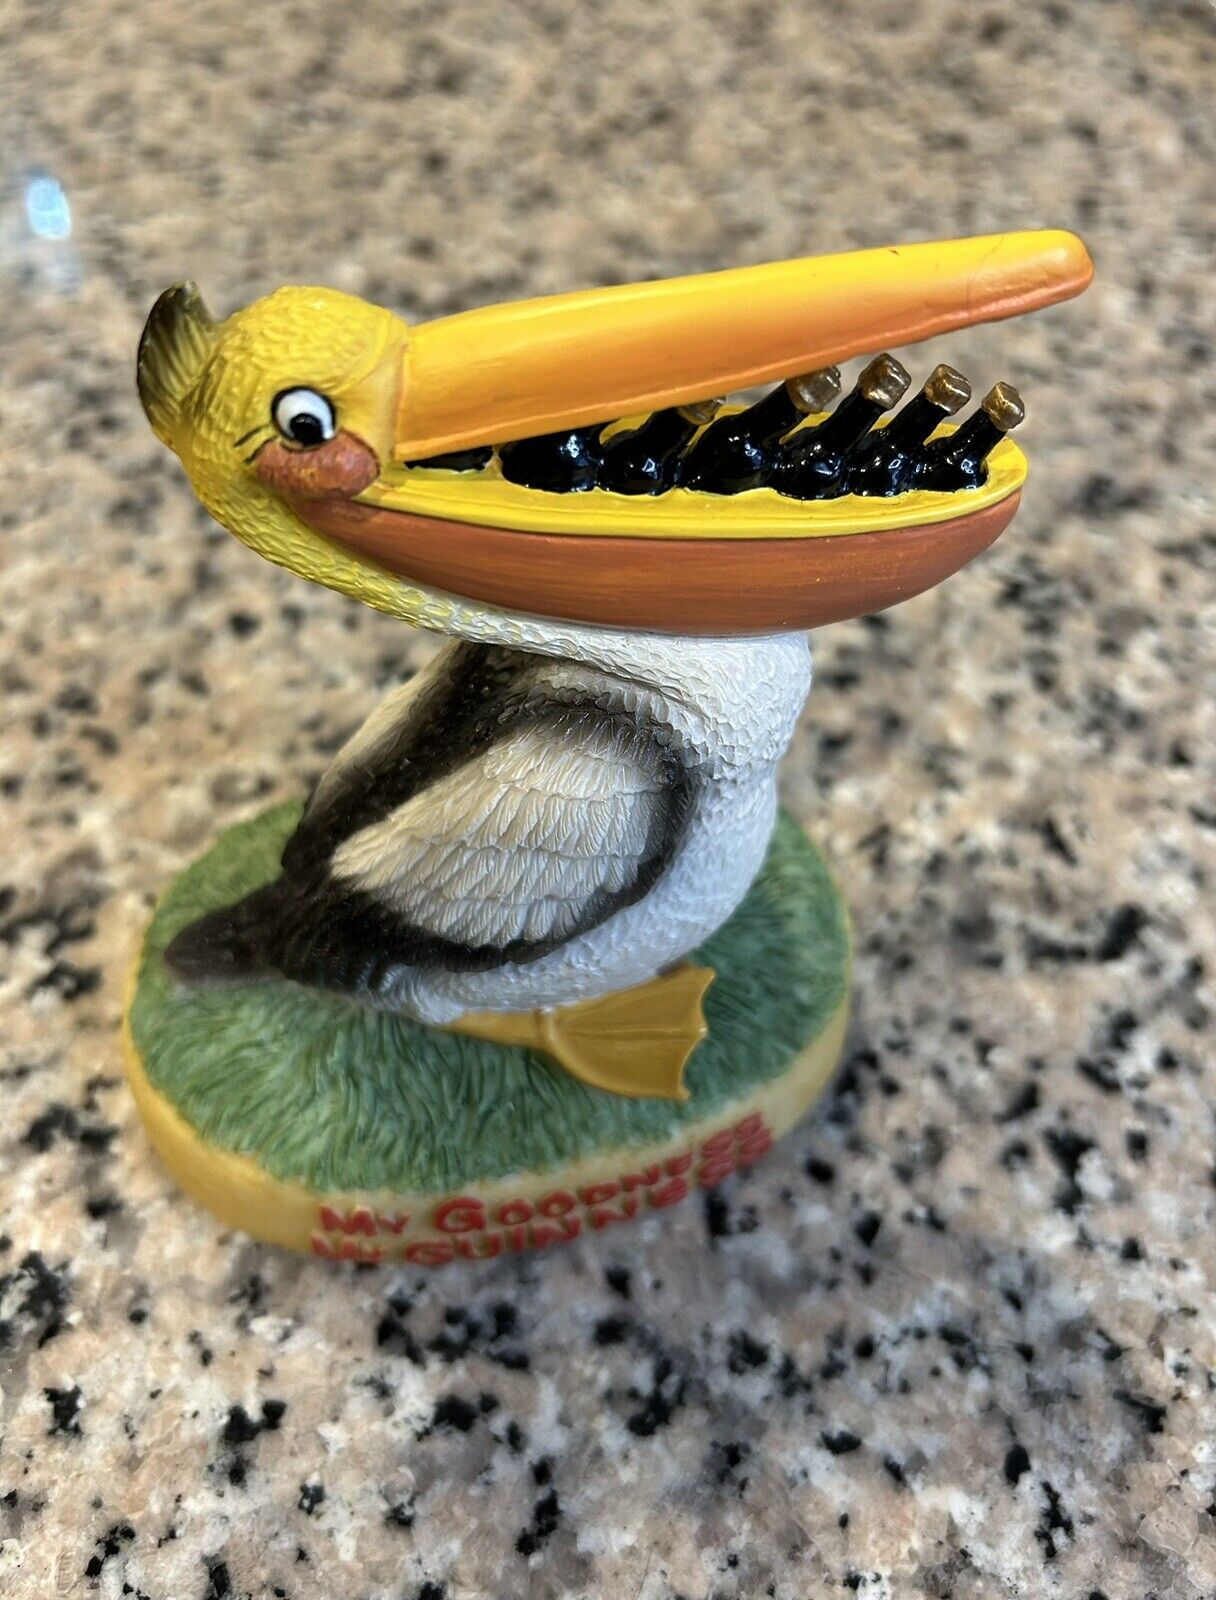 My Goodness My Guinness Pelican Figurine - Rare Vintage Collectible Item 4.5”